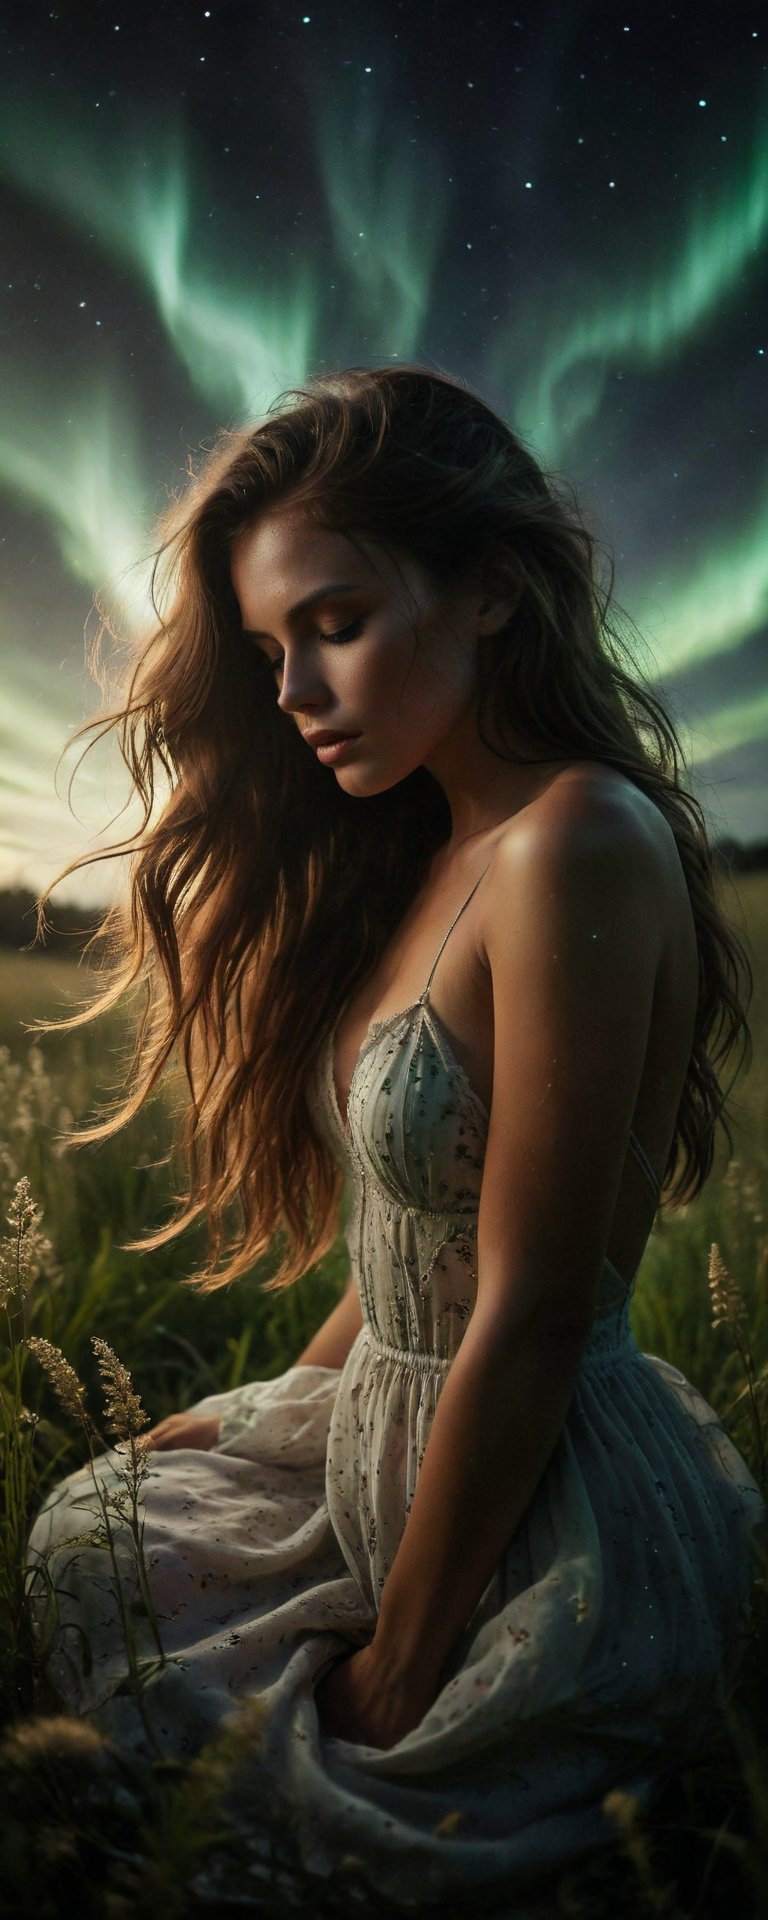 A young tanned woman with beautiful luscious long hair in her 20s lays sensually in a lush field of tall lush green grass, her silhouette gently illuminated by the faint aurora in the night sky.  She is wearing a thin necklace that sways in the wind. The night sky ablaze with the aurora, casting a warm glow on her porcelain skin. Tiny sparks of light dance across the frame, infusing the atmosphere with enchantment. The grass sways softly, creating a hypnotic pattern of movement and light that draws the viewer's eye. far back view, hourglass figure, slender arms and legs